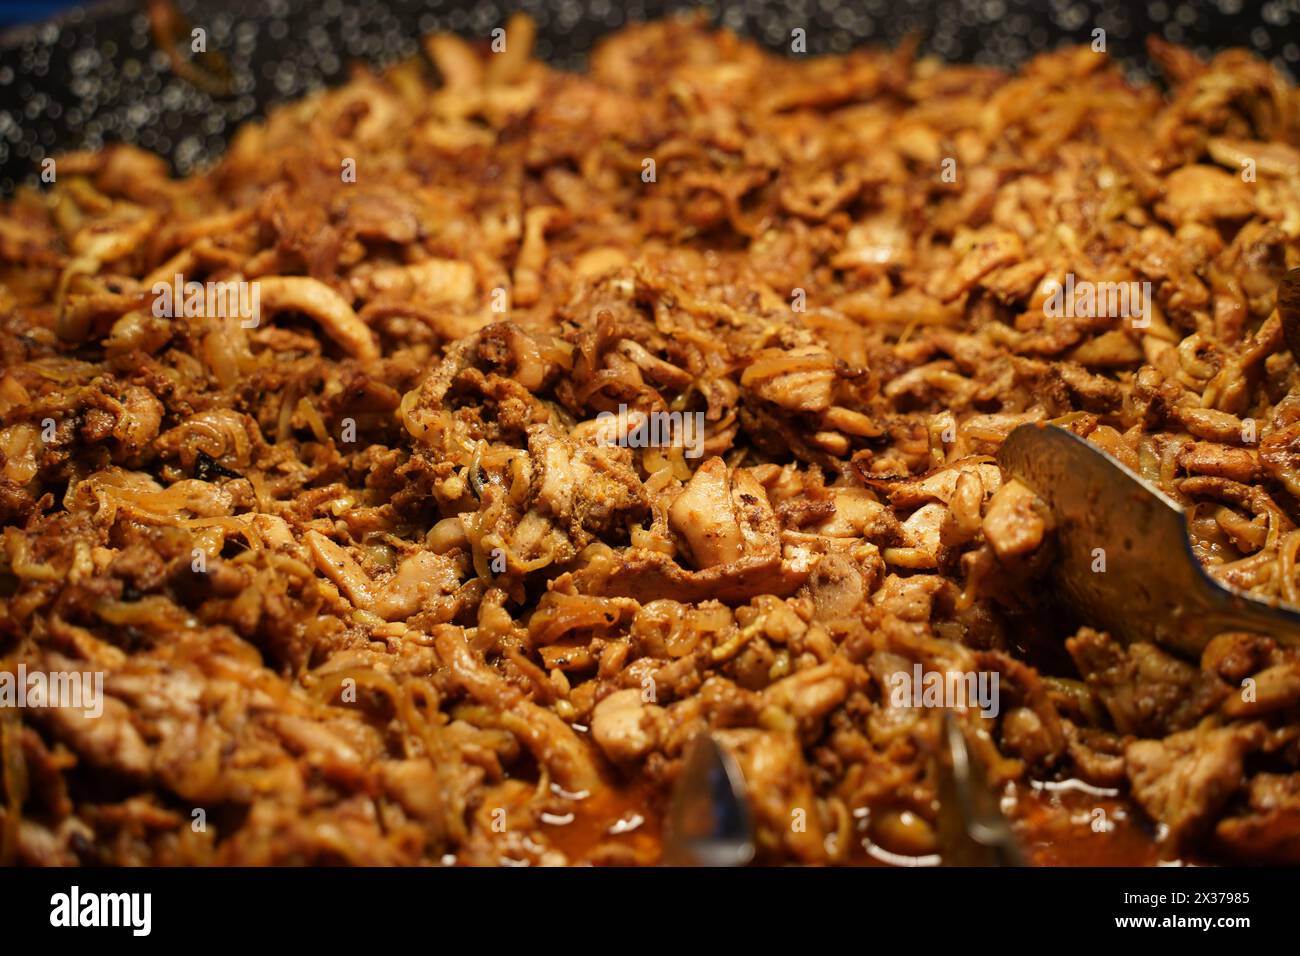 Shredded chicken for mexican street tacos Stock Photo